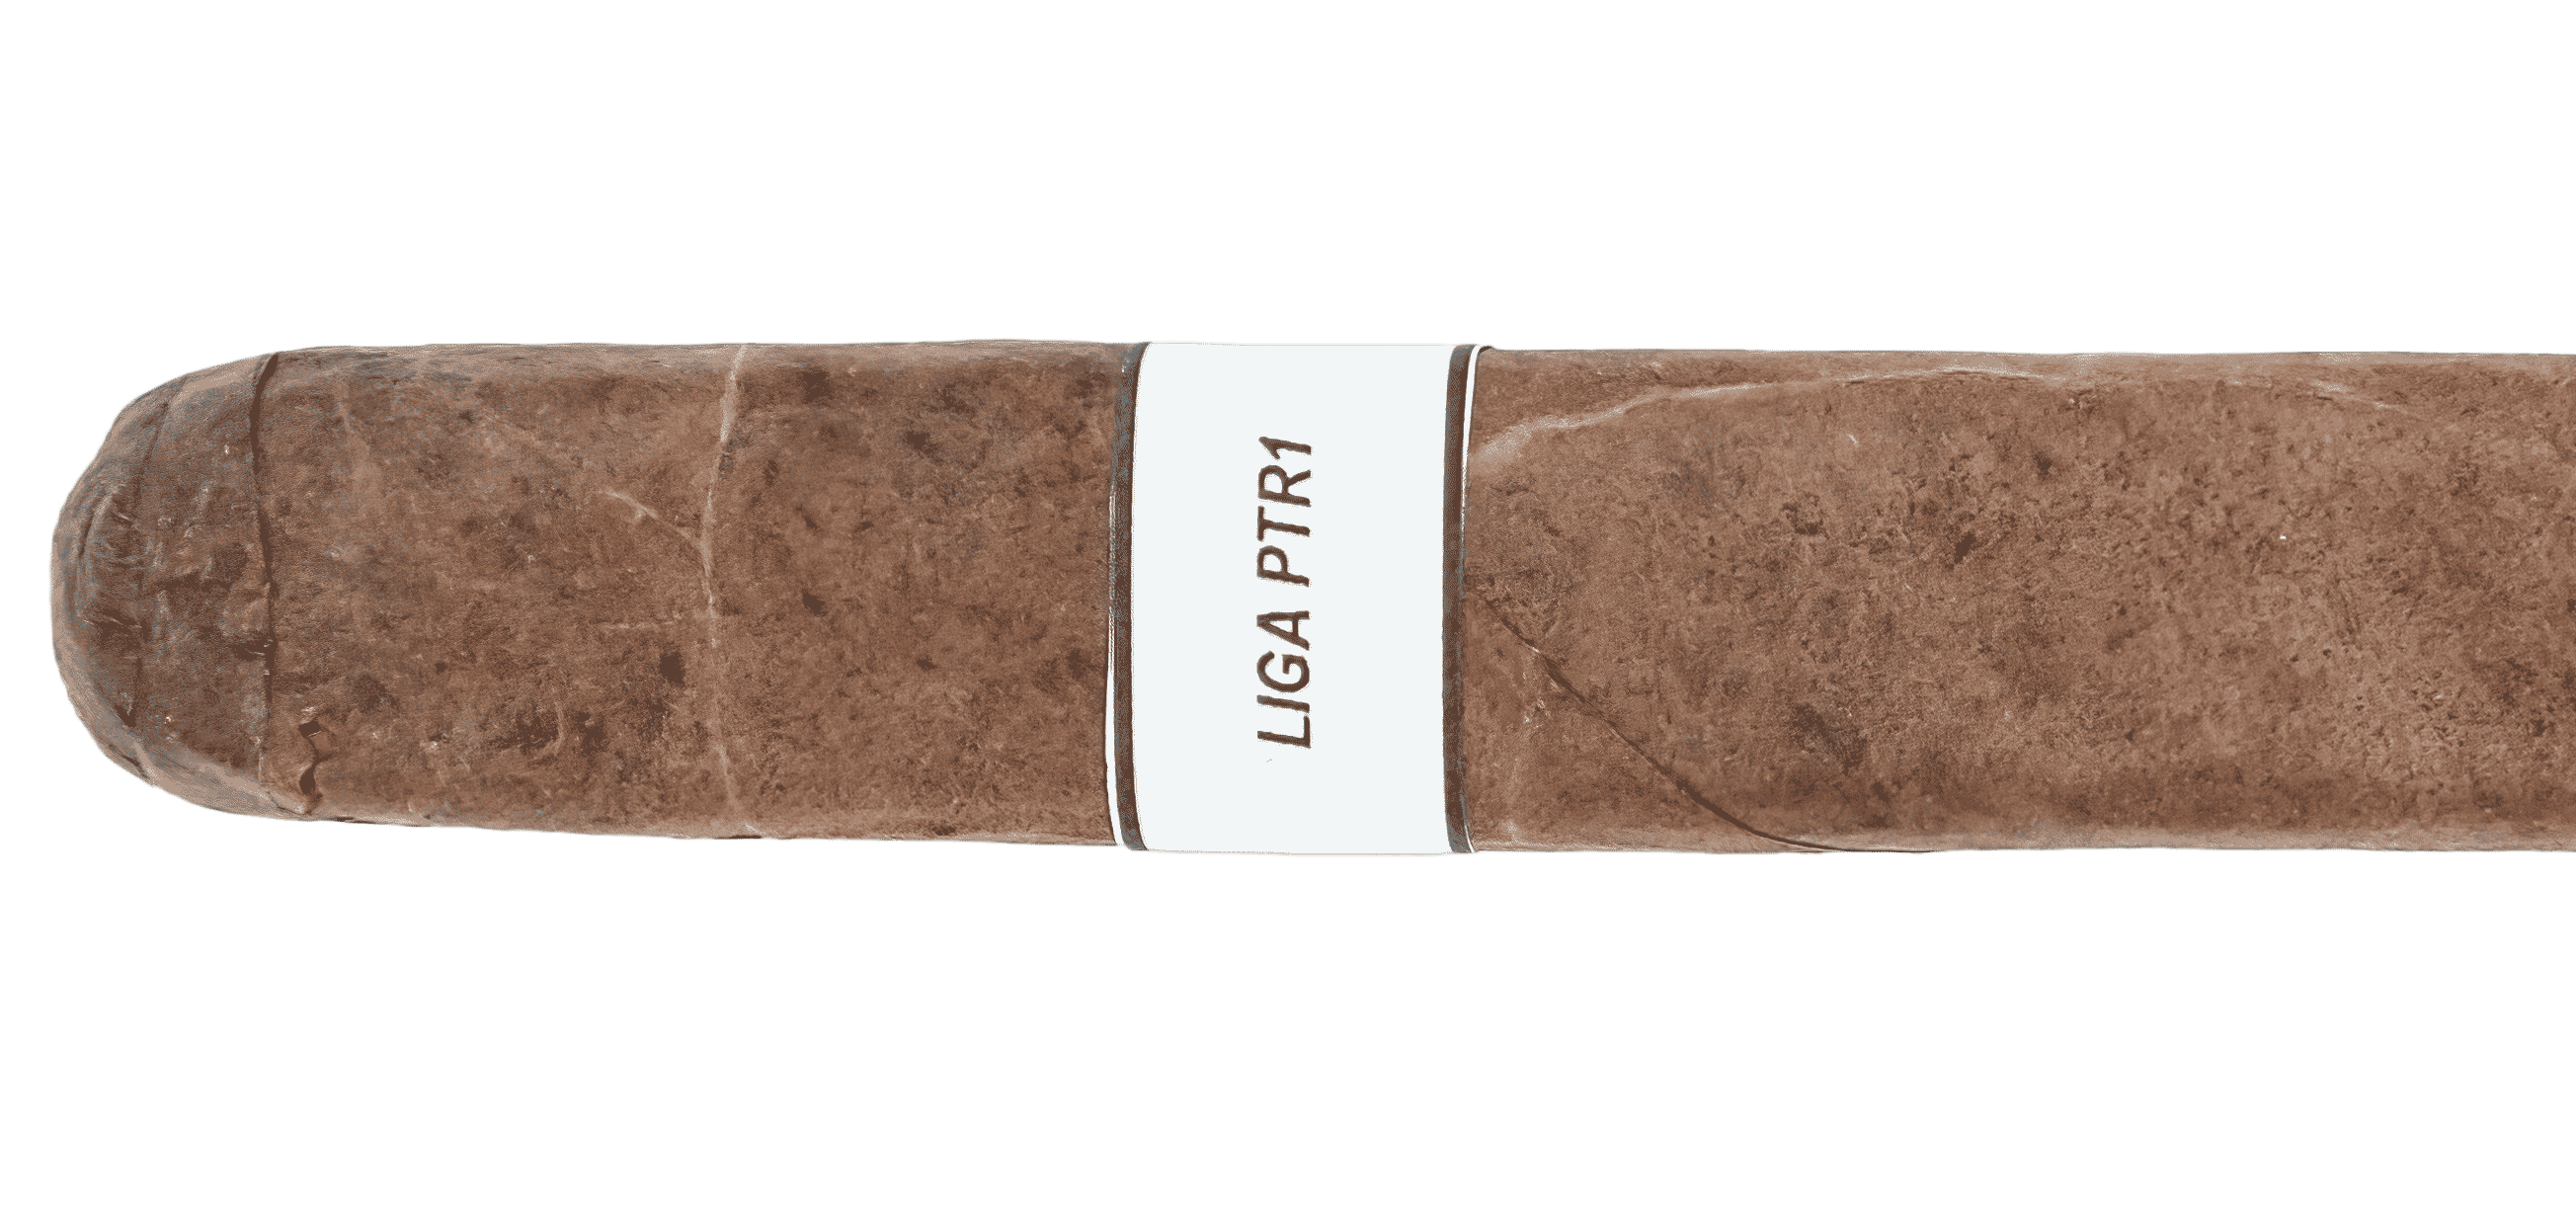 Protocol Phoebe Couzins Natural (Pre-Release) - Blind Cigar Review